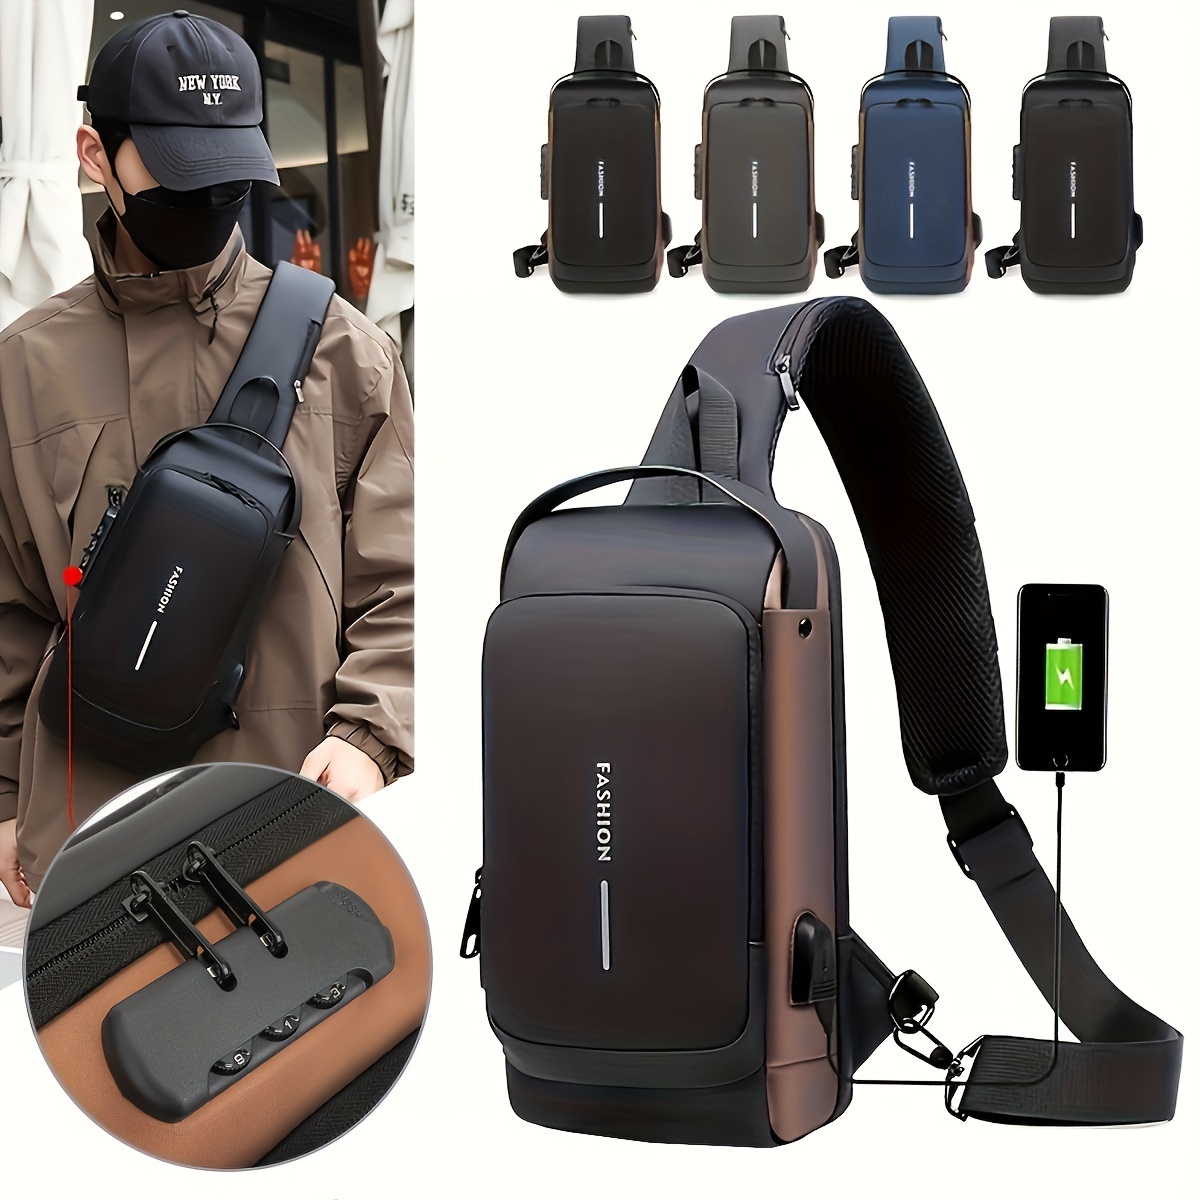 

Men's Sling Chest Bag, Trendy Cycling Bag With Usb Charging Port, Casual Crossbody Bag For Hanging Out & Daily Commute